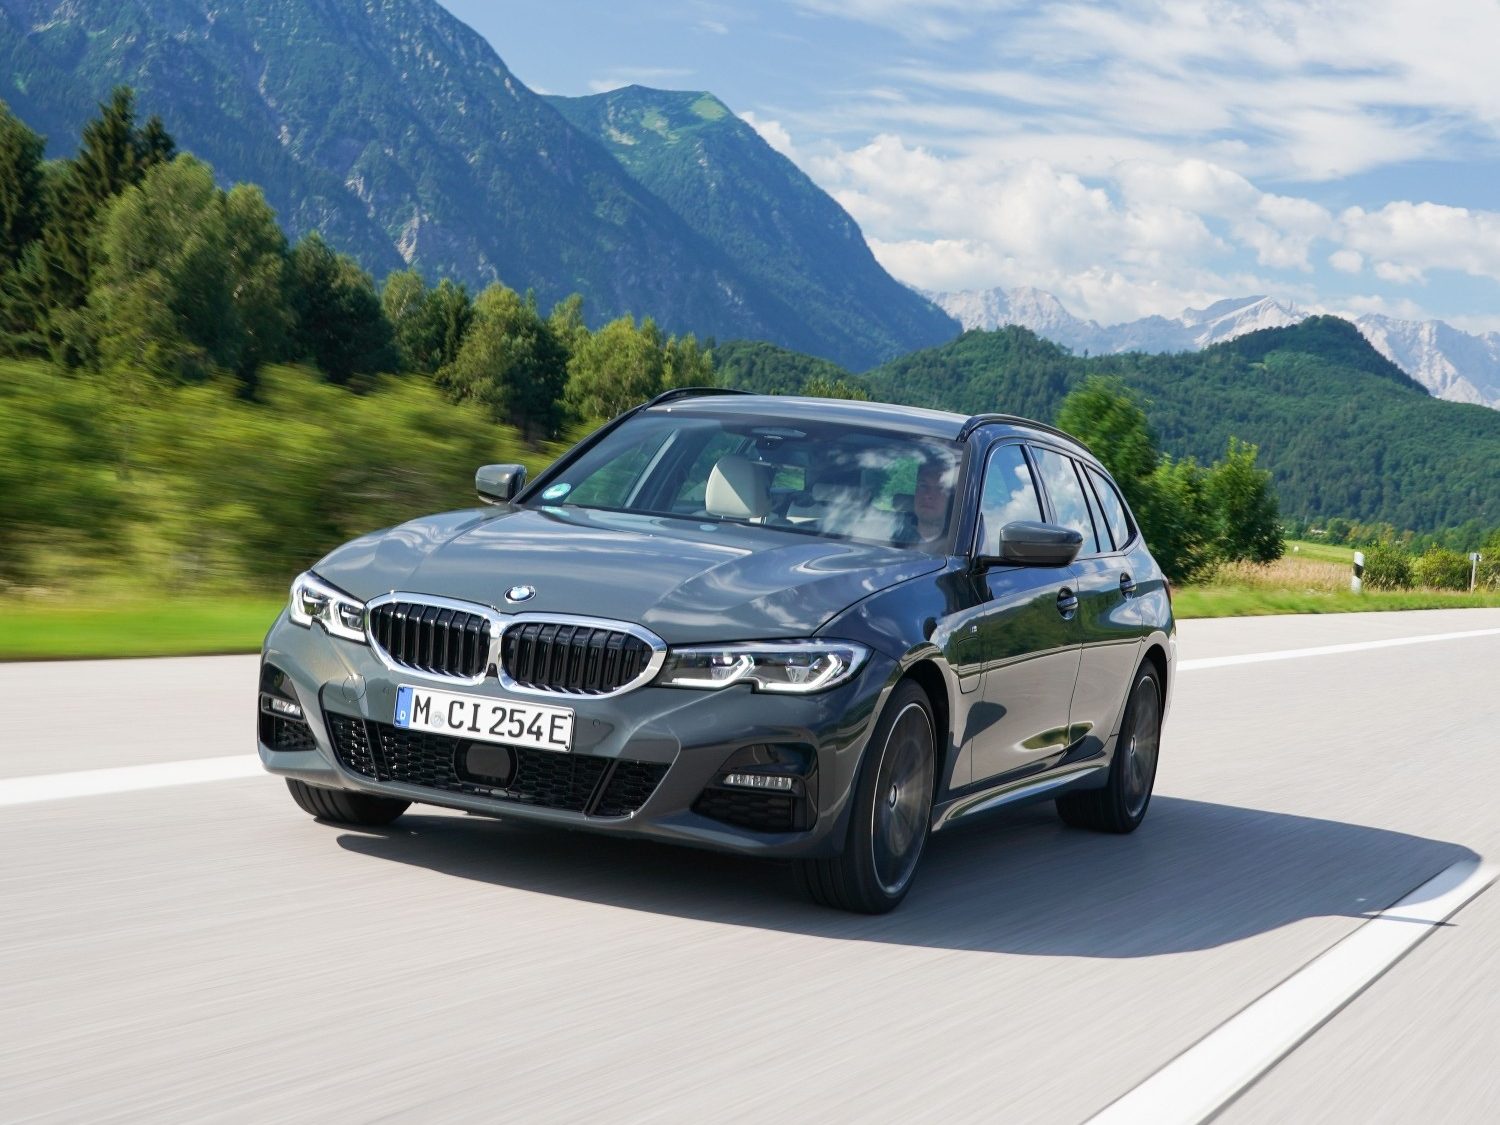 the bmw 330e is a perfect example of an estate car, often also called a station wagon.